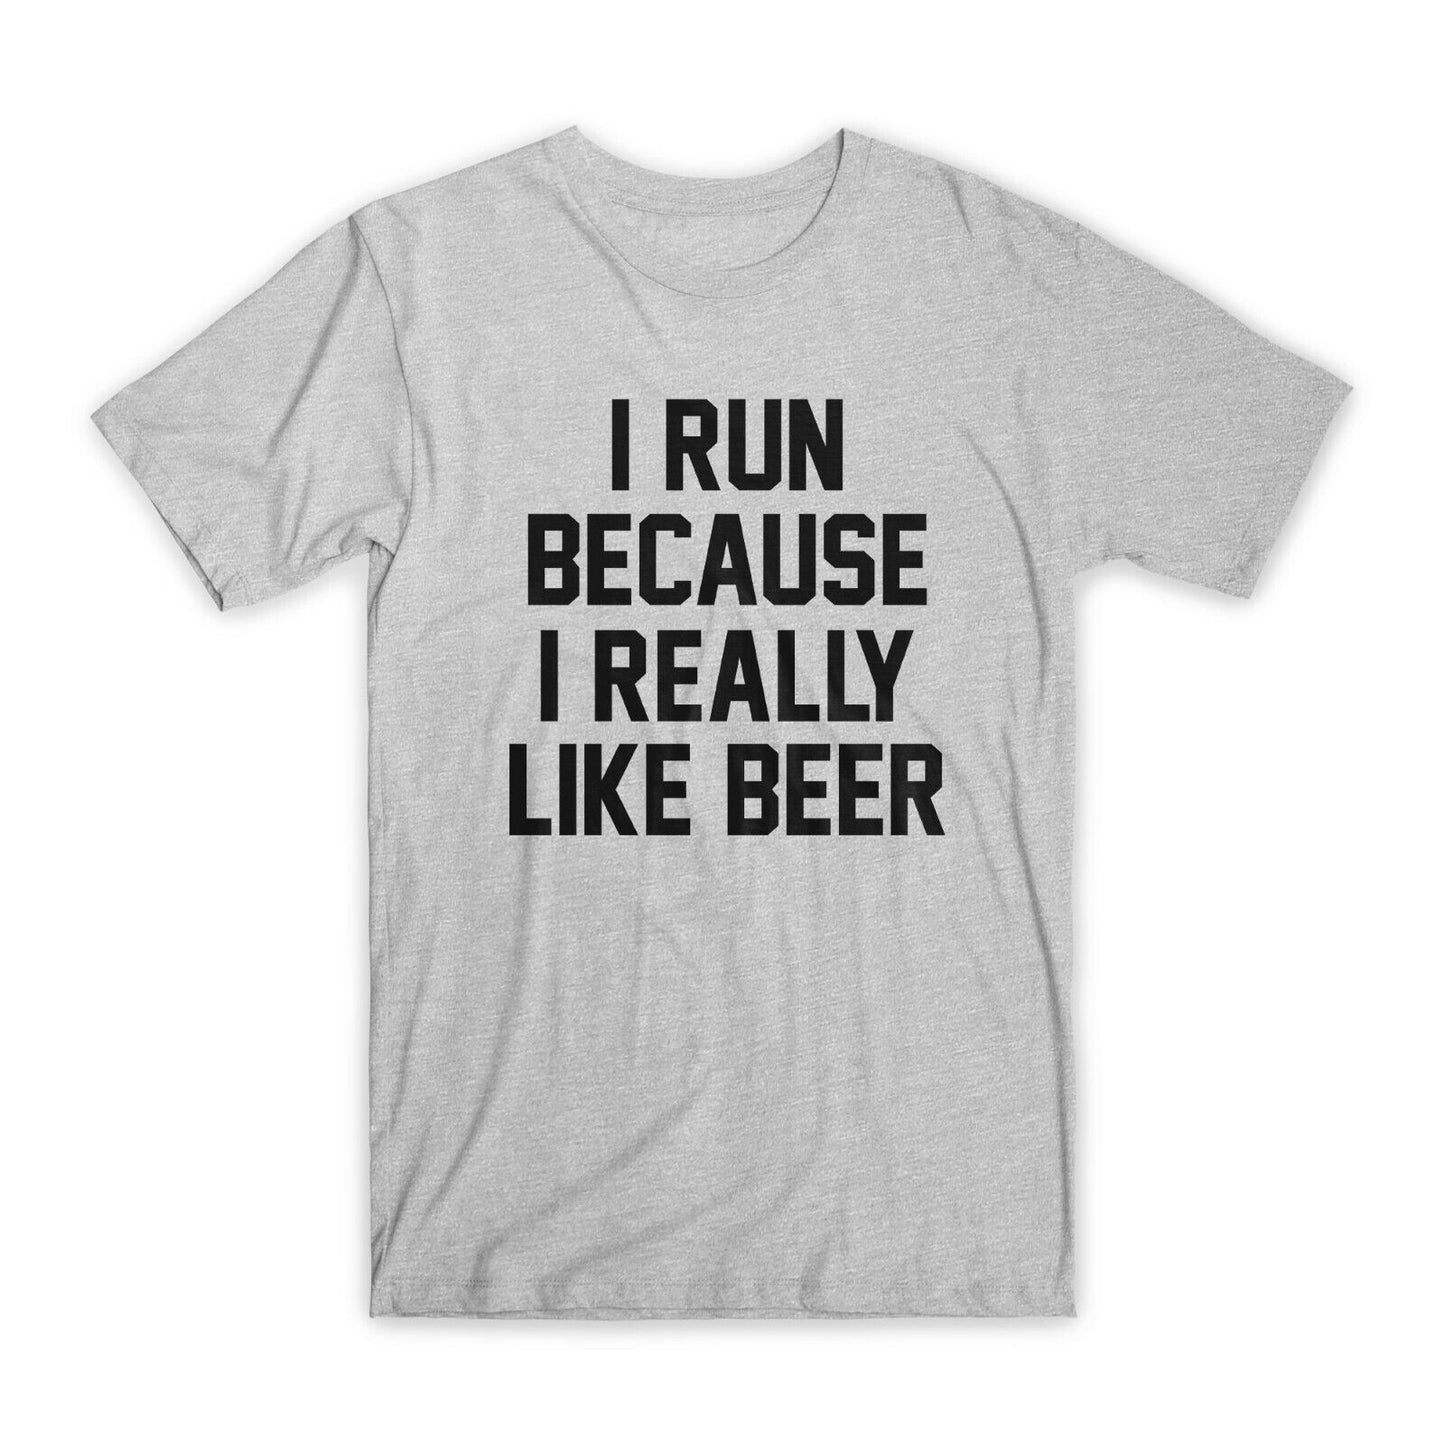 I Run Because I Really Like Beer T-Shirt Premium Soft Cotton Funny Tees Gift NEW